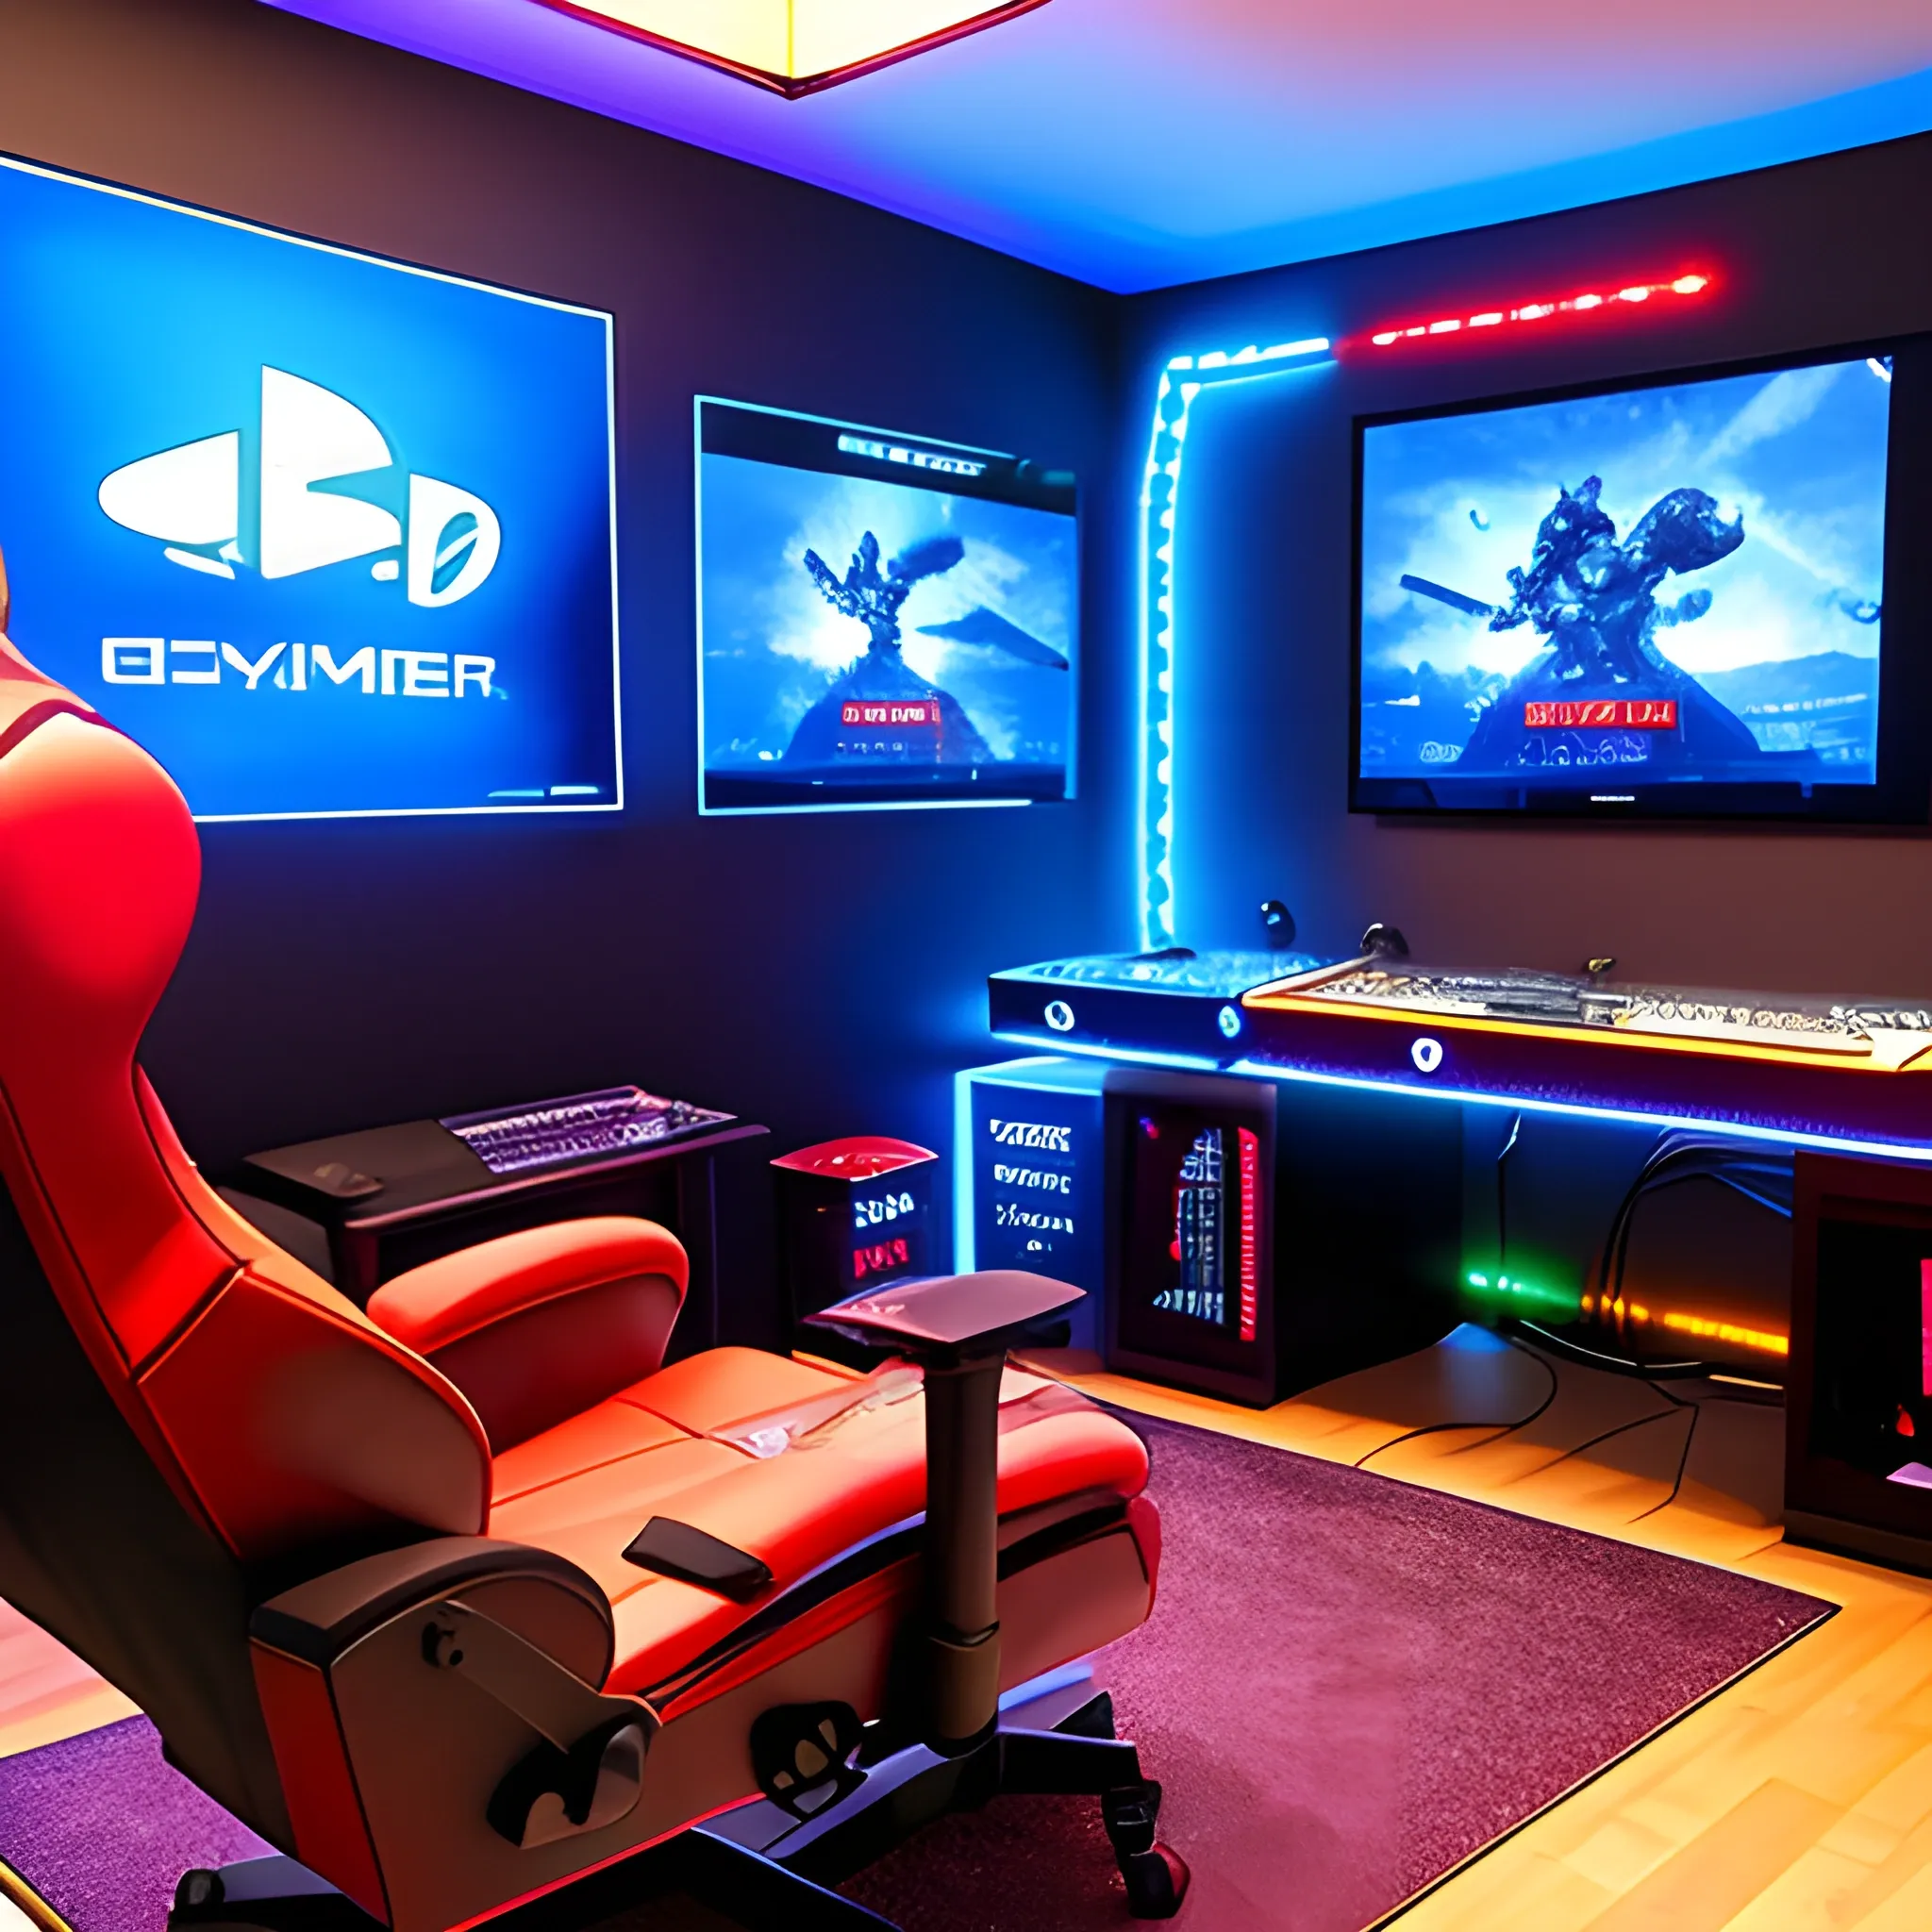 A gamer room with many video game consoles and led lights and that has a gamer chair with its desk and a PC.
